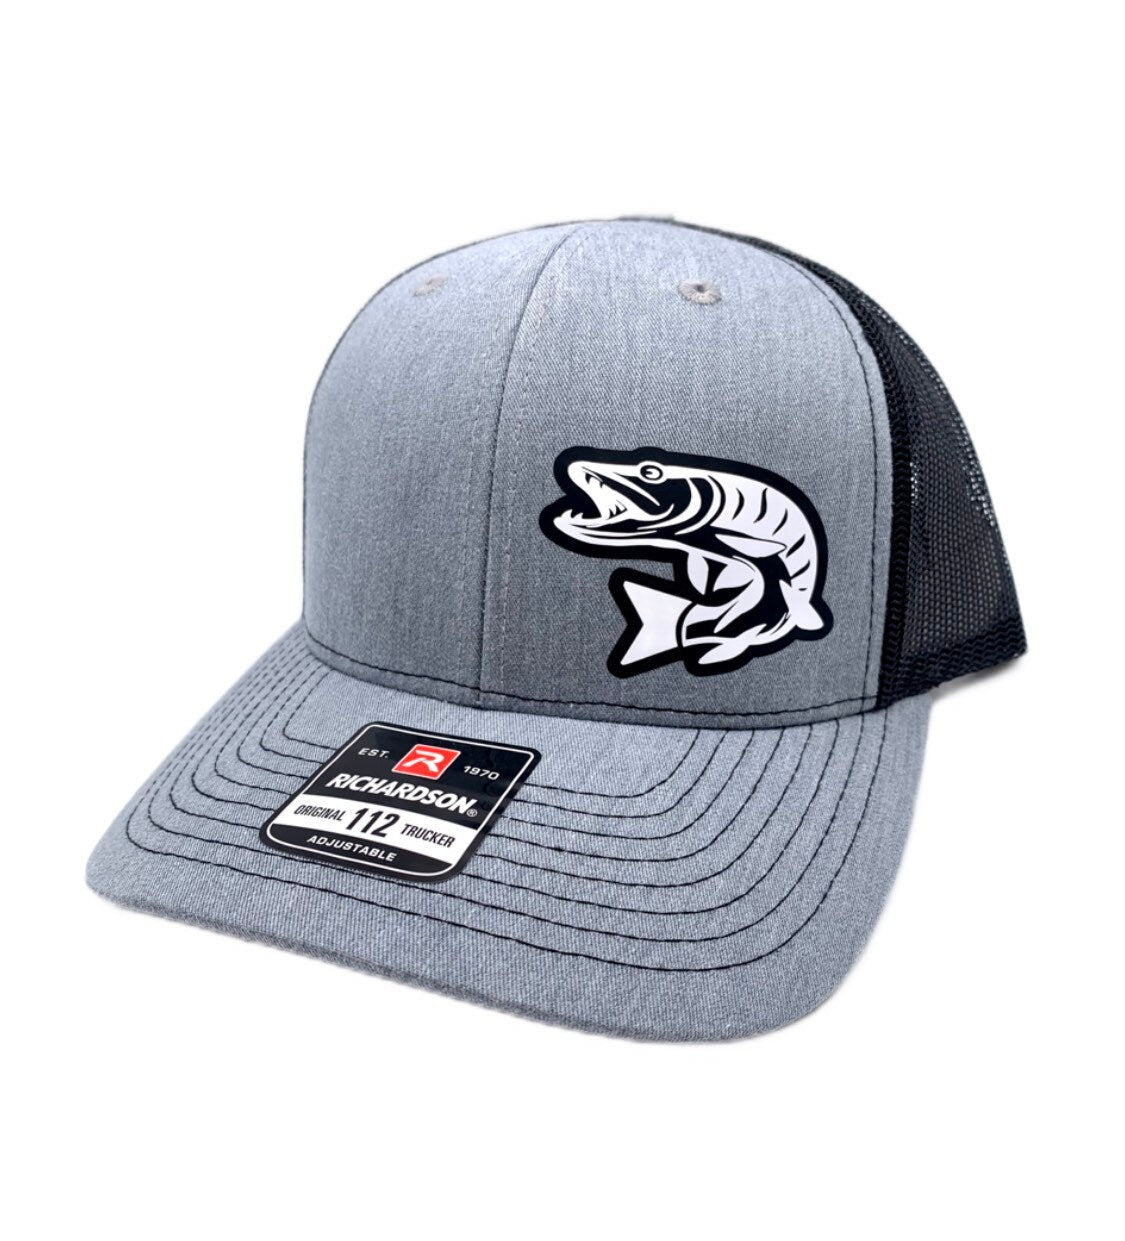 Musky Fishing SnapBack Adjustable Hat with multiple hat color